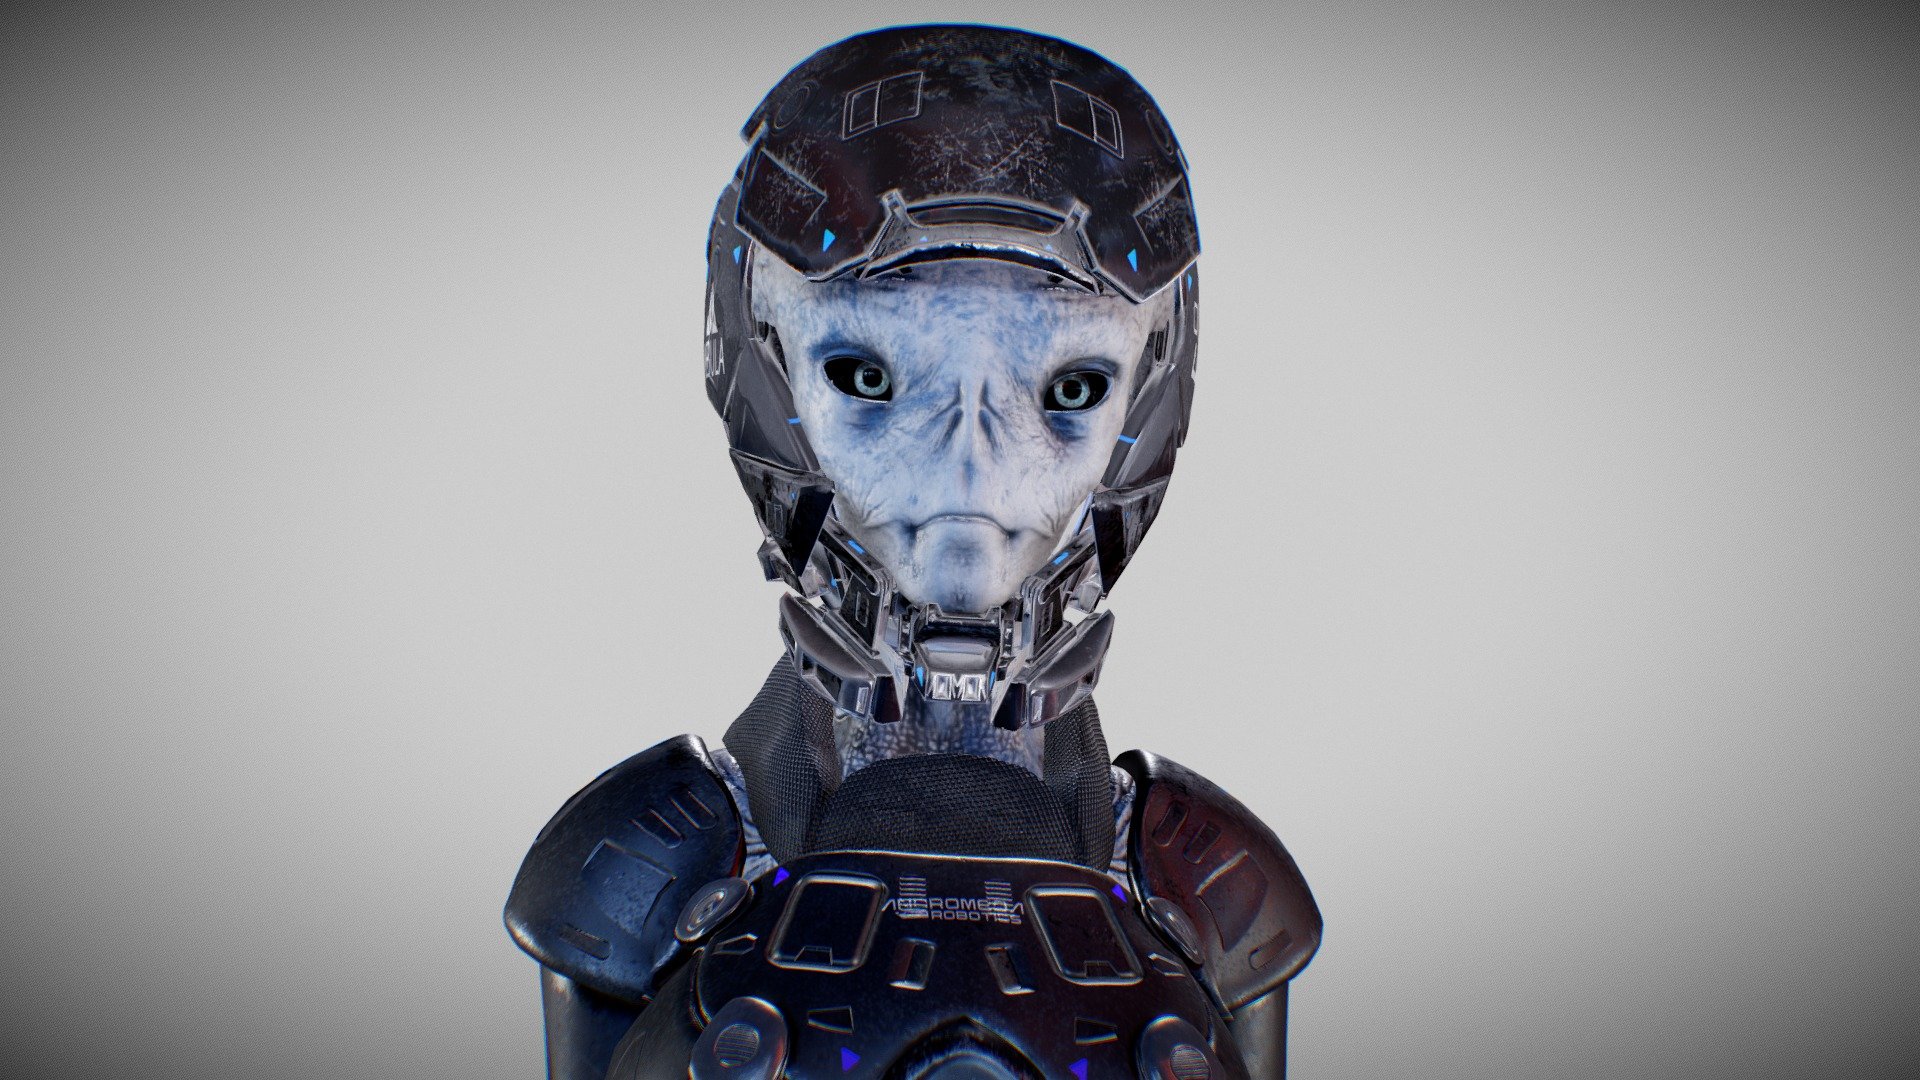 CHARACTER ALIEN HUMANOIDE BZ-3456   BY OSCAR CREATIVO All rights reserved www.oscarcreativo.co
Full Proyect:https://www.artstation.com/artwork/LR6Va0

Attach additional file: BLENDER POSE T TEXTURES RIGGING
TEXTURES PBR 2K. 4K
RIGGING**

**If you need support write to my email creagraf@hotmail.com
**



 - ALIEN HUMANOIDE BZ-3456 BY Oscar creativo - Buy Royalty Free 3D model by OSCAR CREATIVO (@oscar_creativo) 3d model